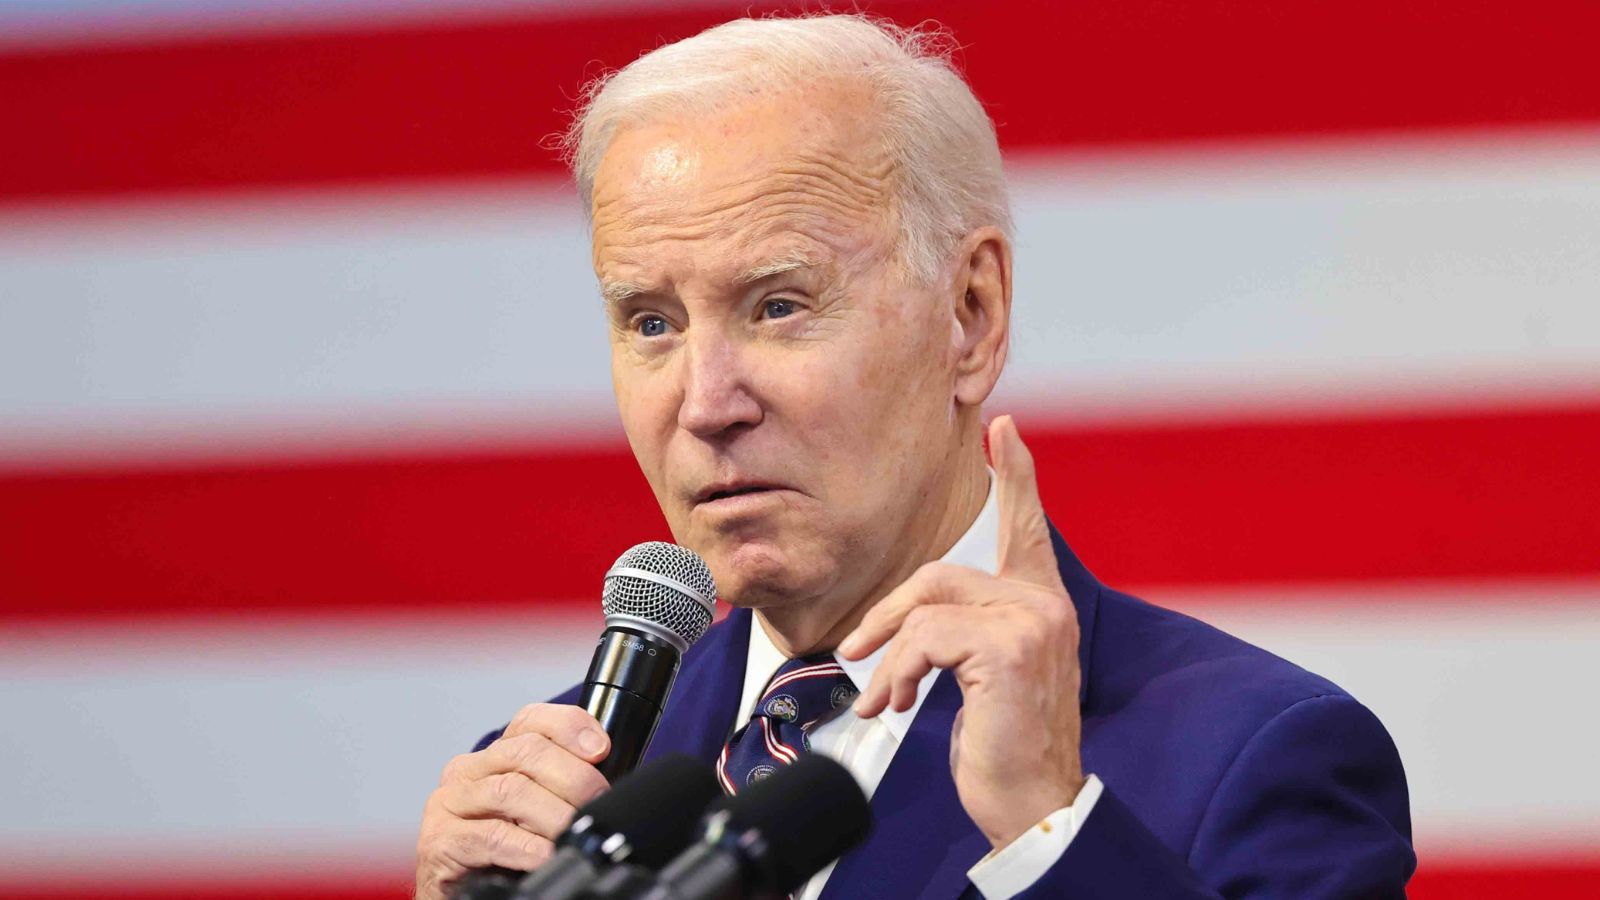 “Obama Is Biden’s Boss”: Fox News Host Claims Trump’s Blunders Are a Deliberate Scheme